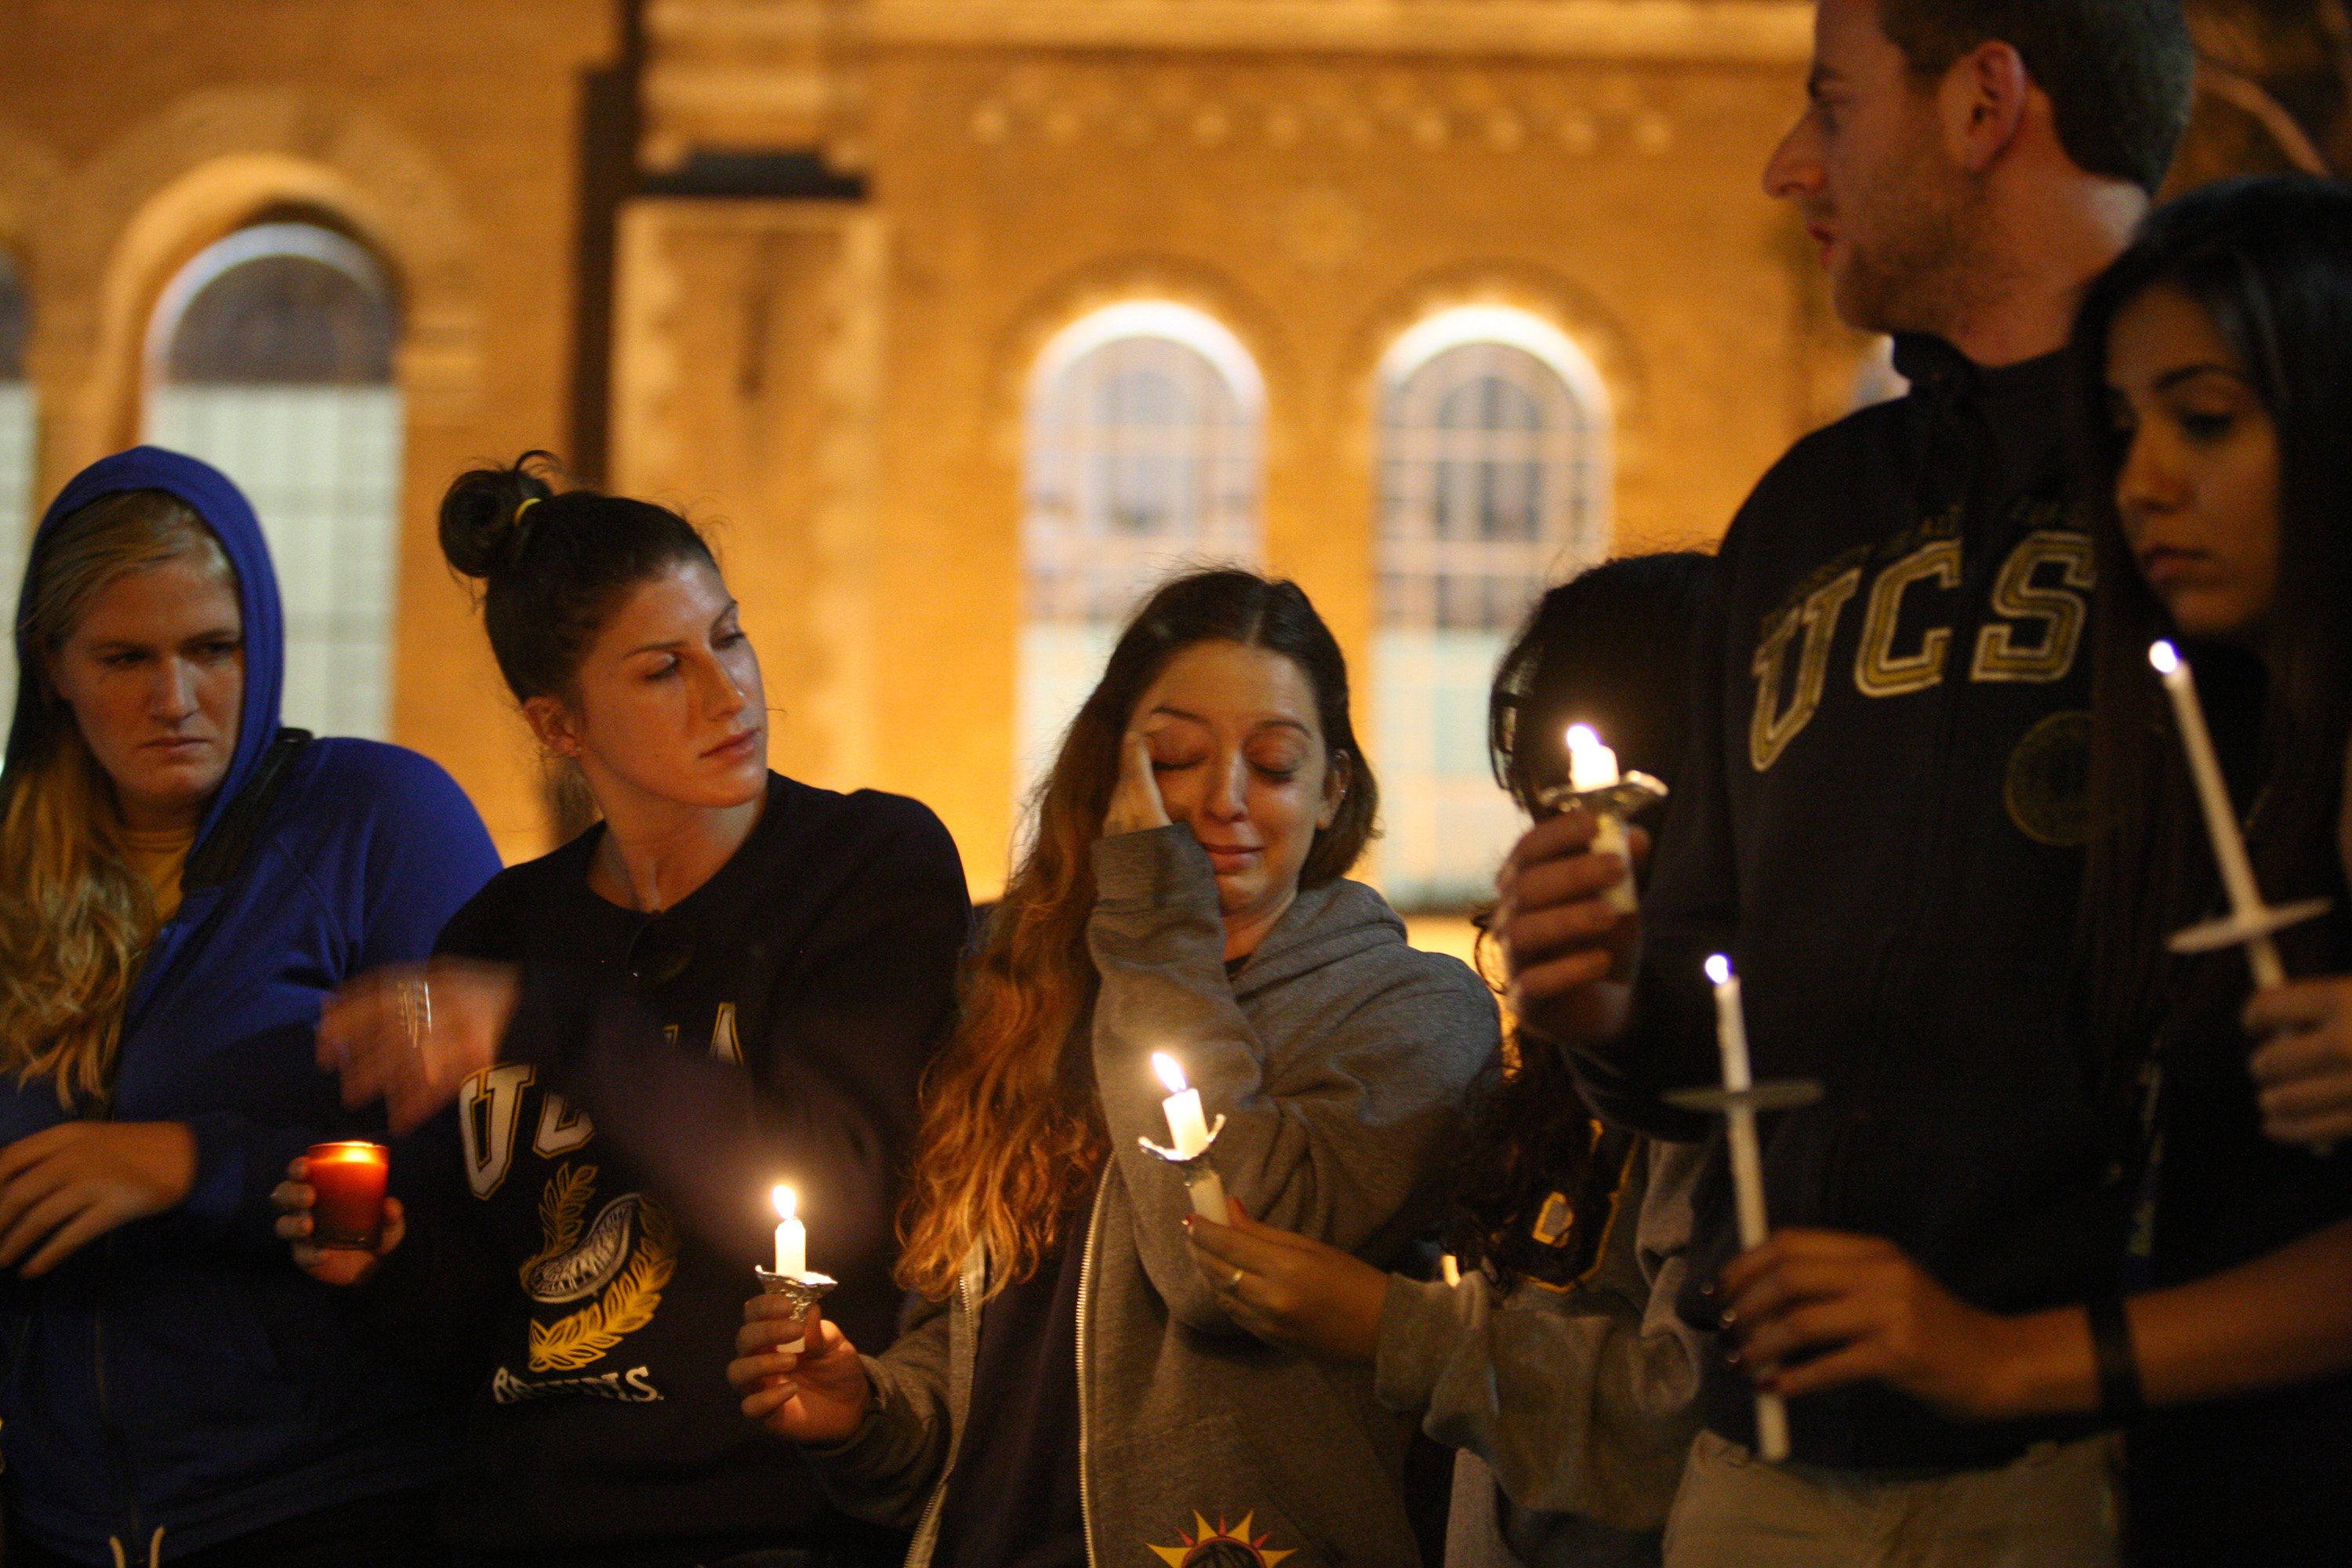 Students of UCSB and UCLA mourn at a candlelight vigil at UCLA for the victims of a killing rampage over the weekend near UCSB on May 26, 2014 in Los Angeles, Calif. (David McNew—Getty Images)